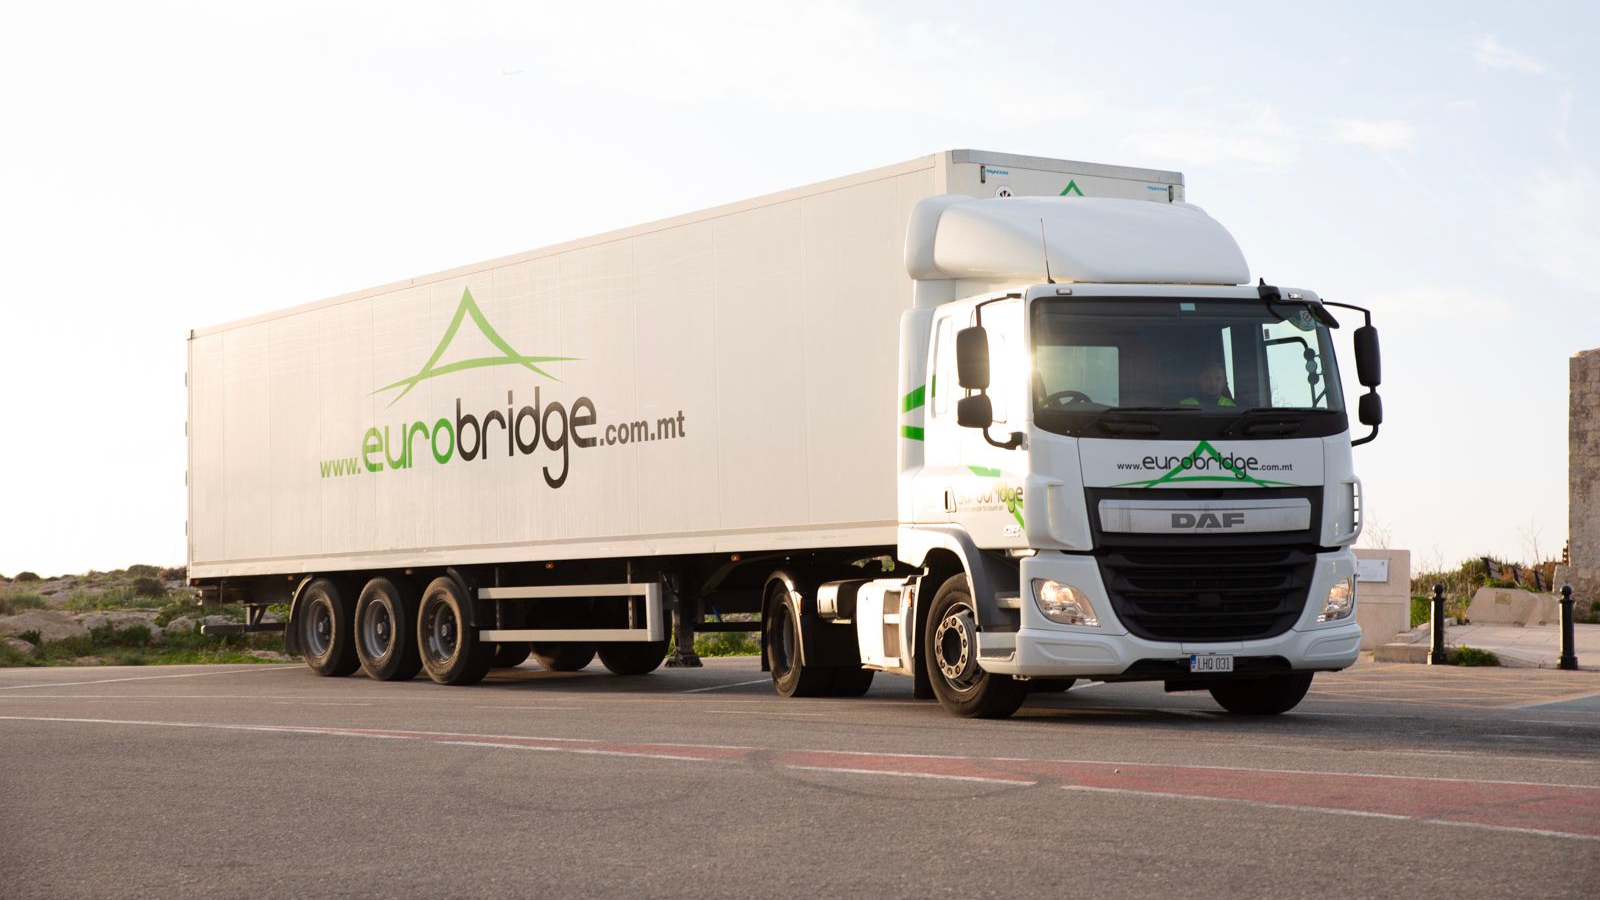 EuroBridge’s Growth with BeOne Global: From CRM to Business Intelligence